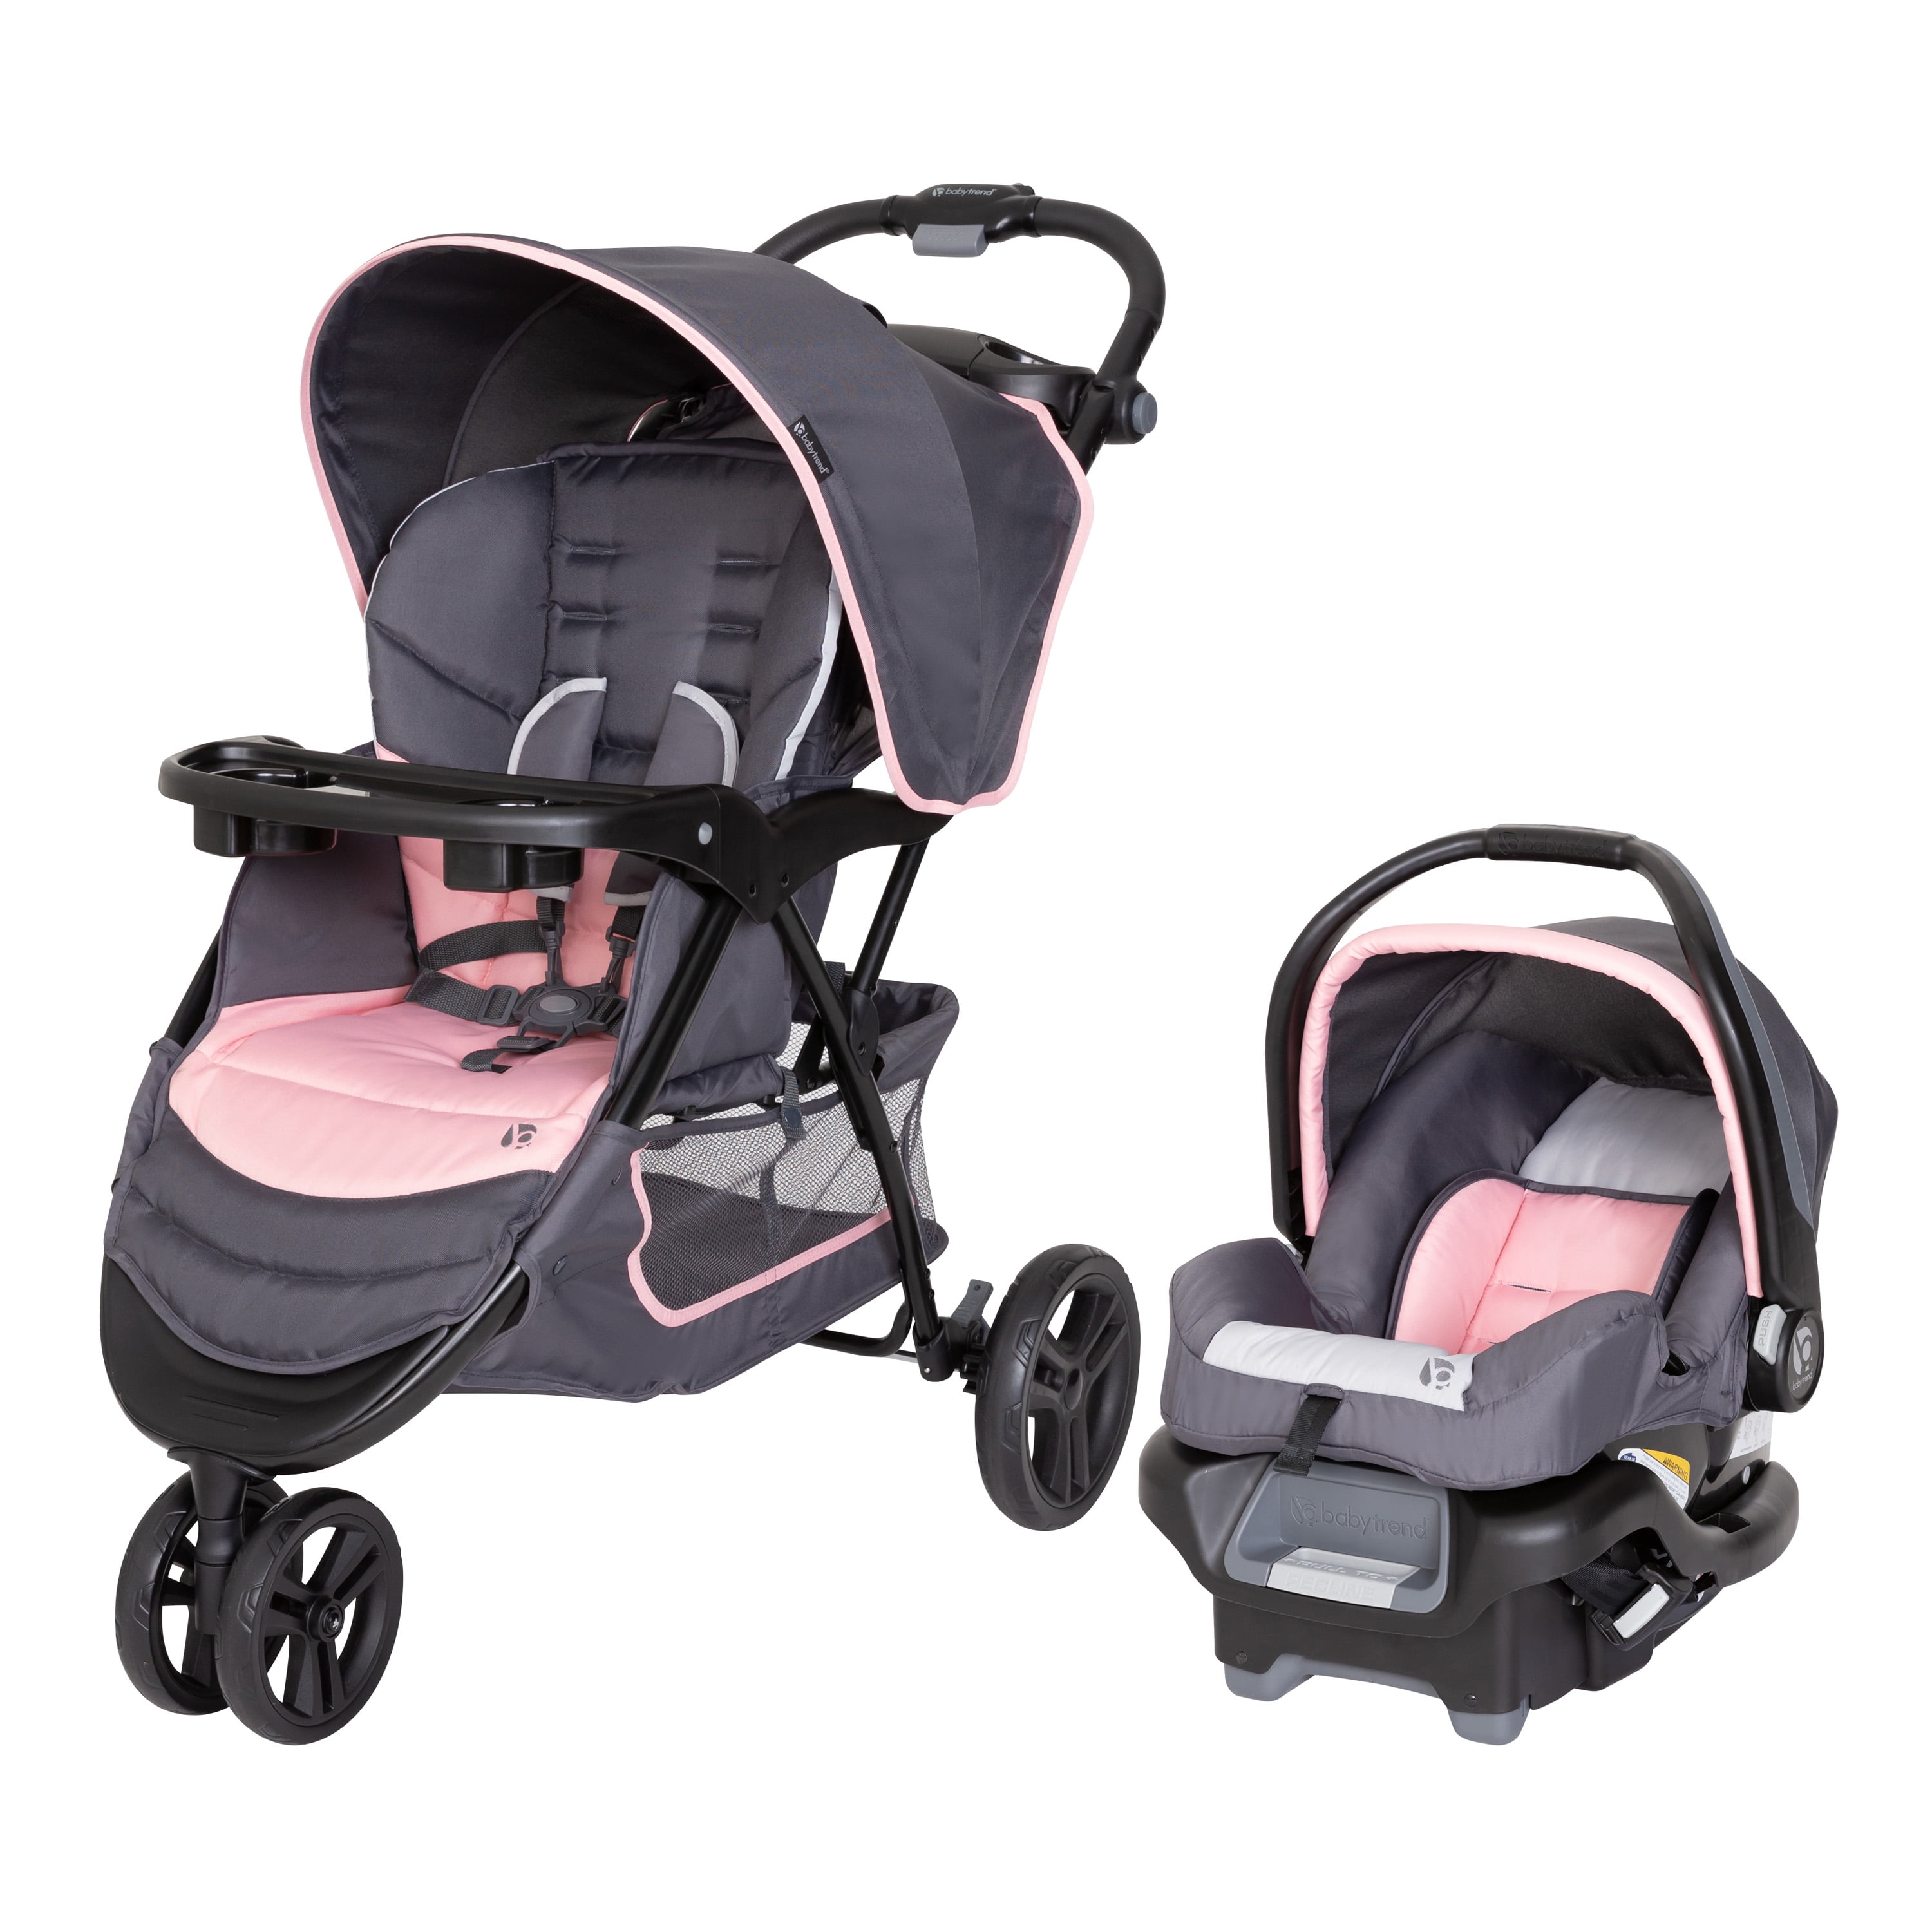 Baby Trend EZ Ride Travel System Stroller, Two Toned Flamingo Pink - image 1 of 12